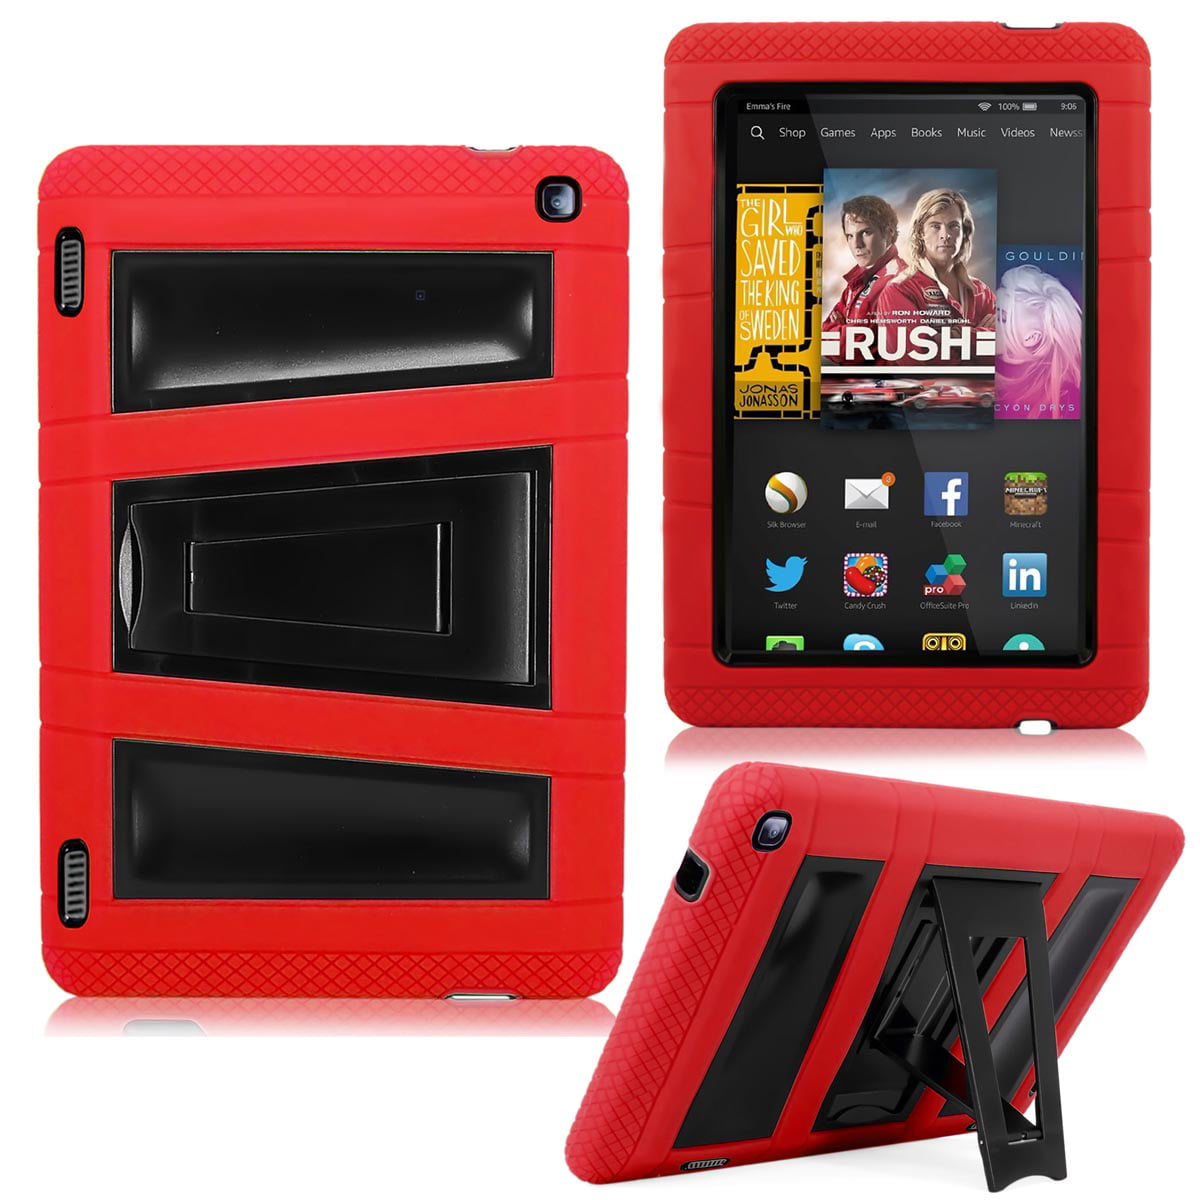 - Brown Premium Sleeve Case for Fire HD 7 Oct 2, 2014 Release Bear Motion for New Fire HD 7 Tablet